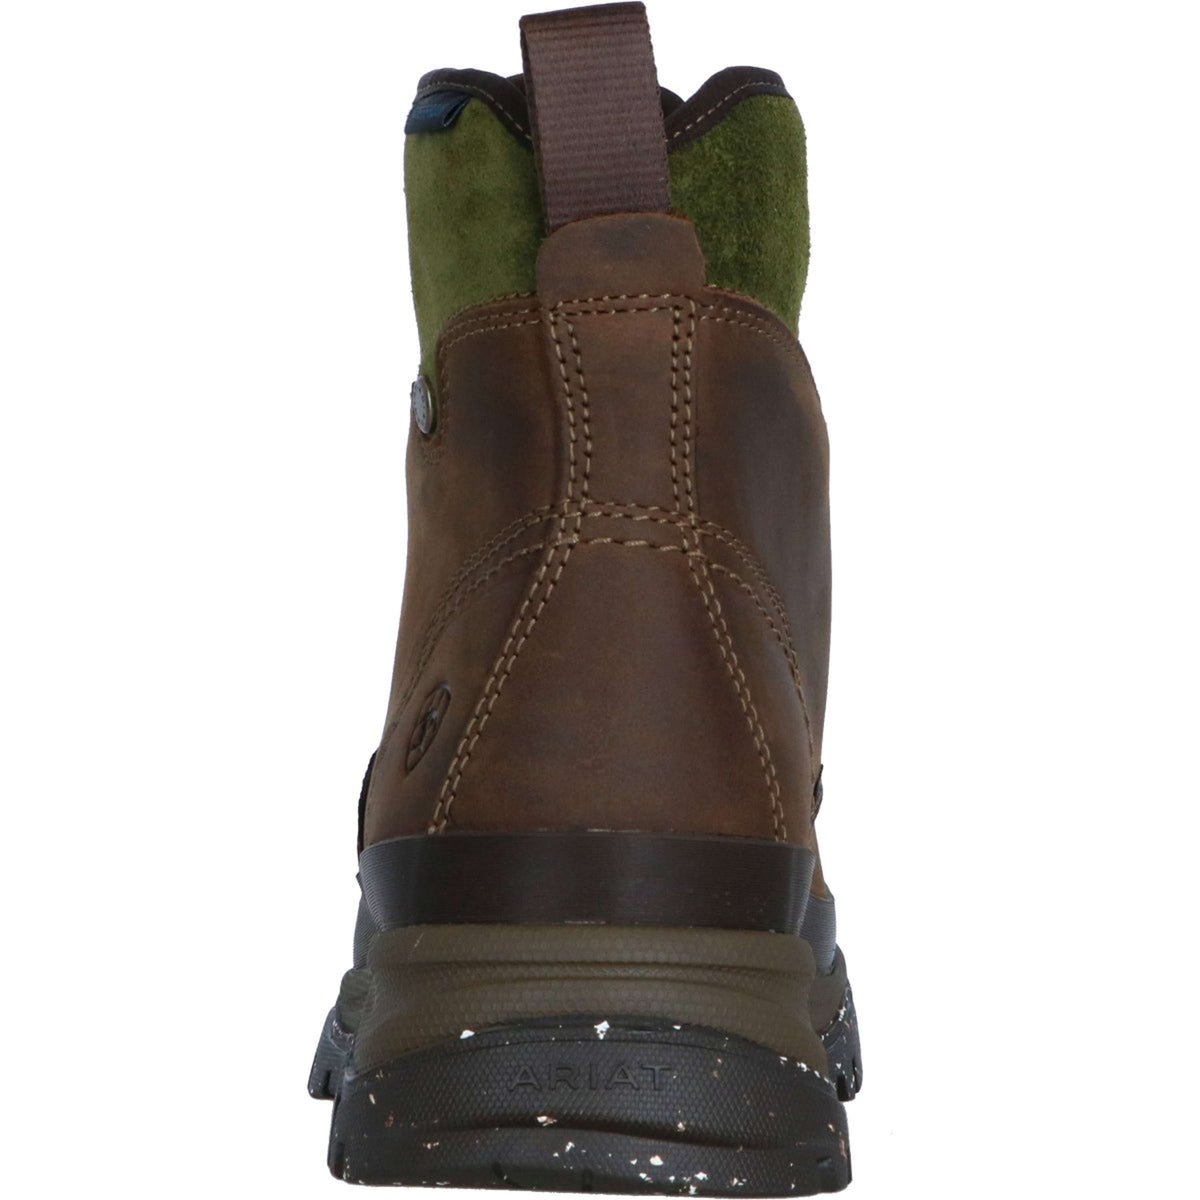 Ariat Outdoorstiefel Moresby H2O Oily Braun/Olive